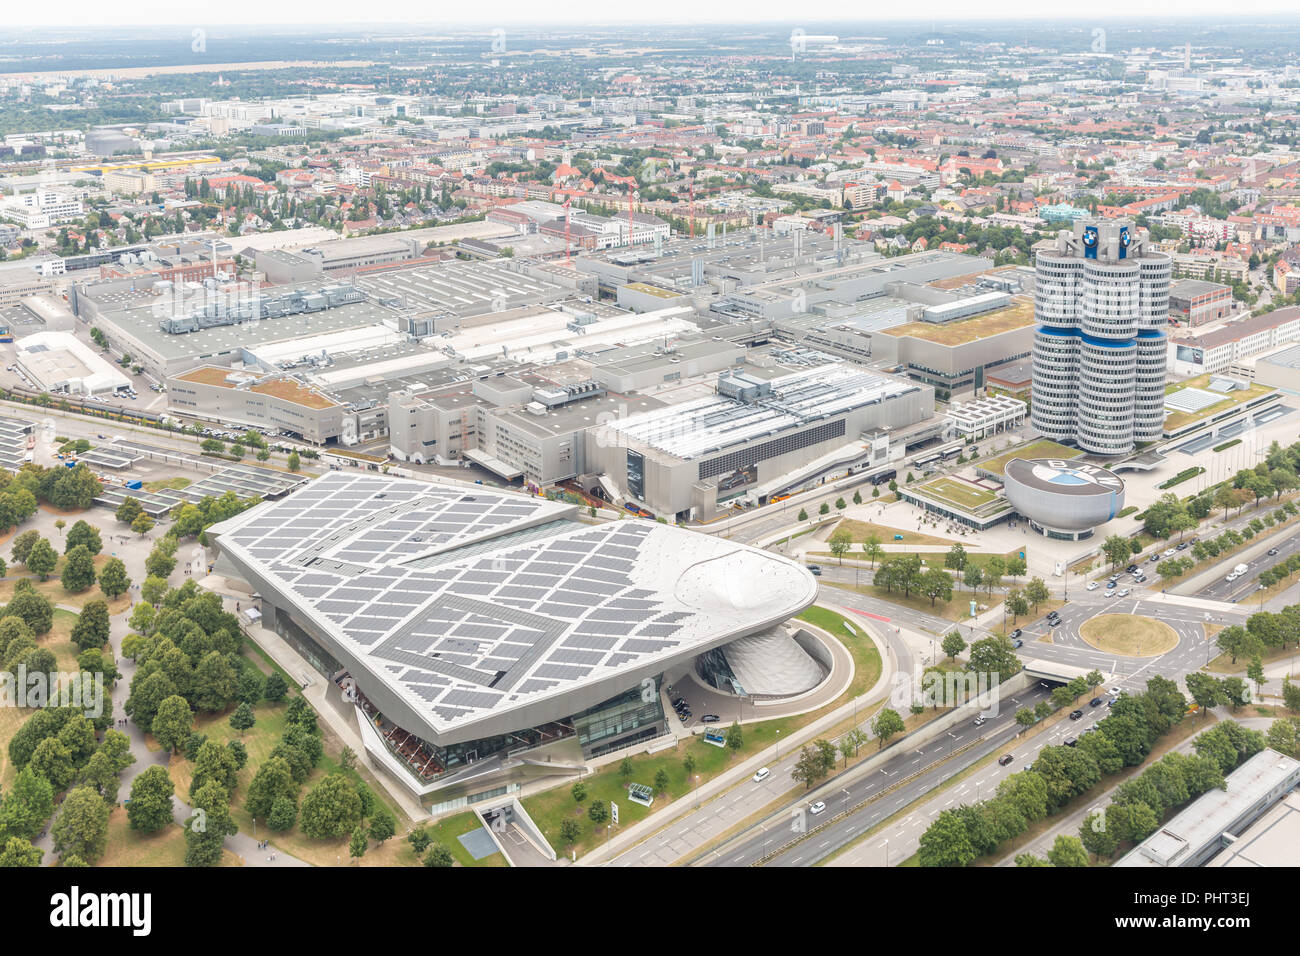 MUNICH, GERMANY - AUG 1, 2015: Aerial view of Munich with BMW buildings from Olympic communication tower on August 1, 2015 in Munich, Germany Stock Photo